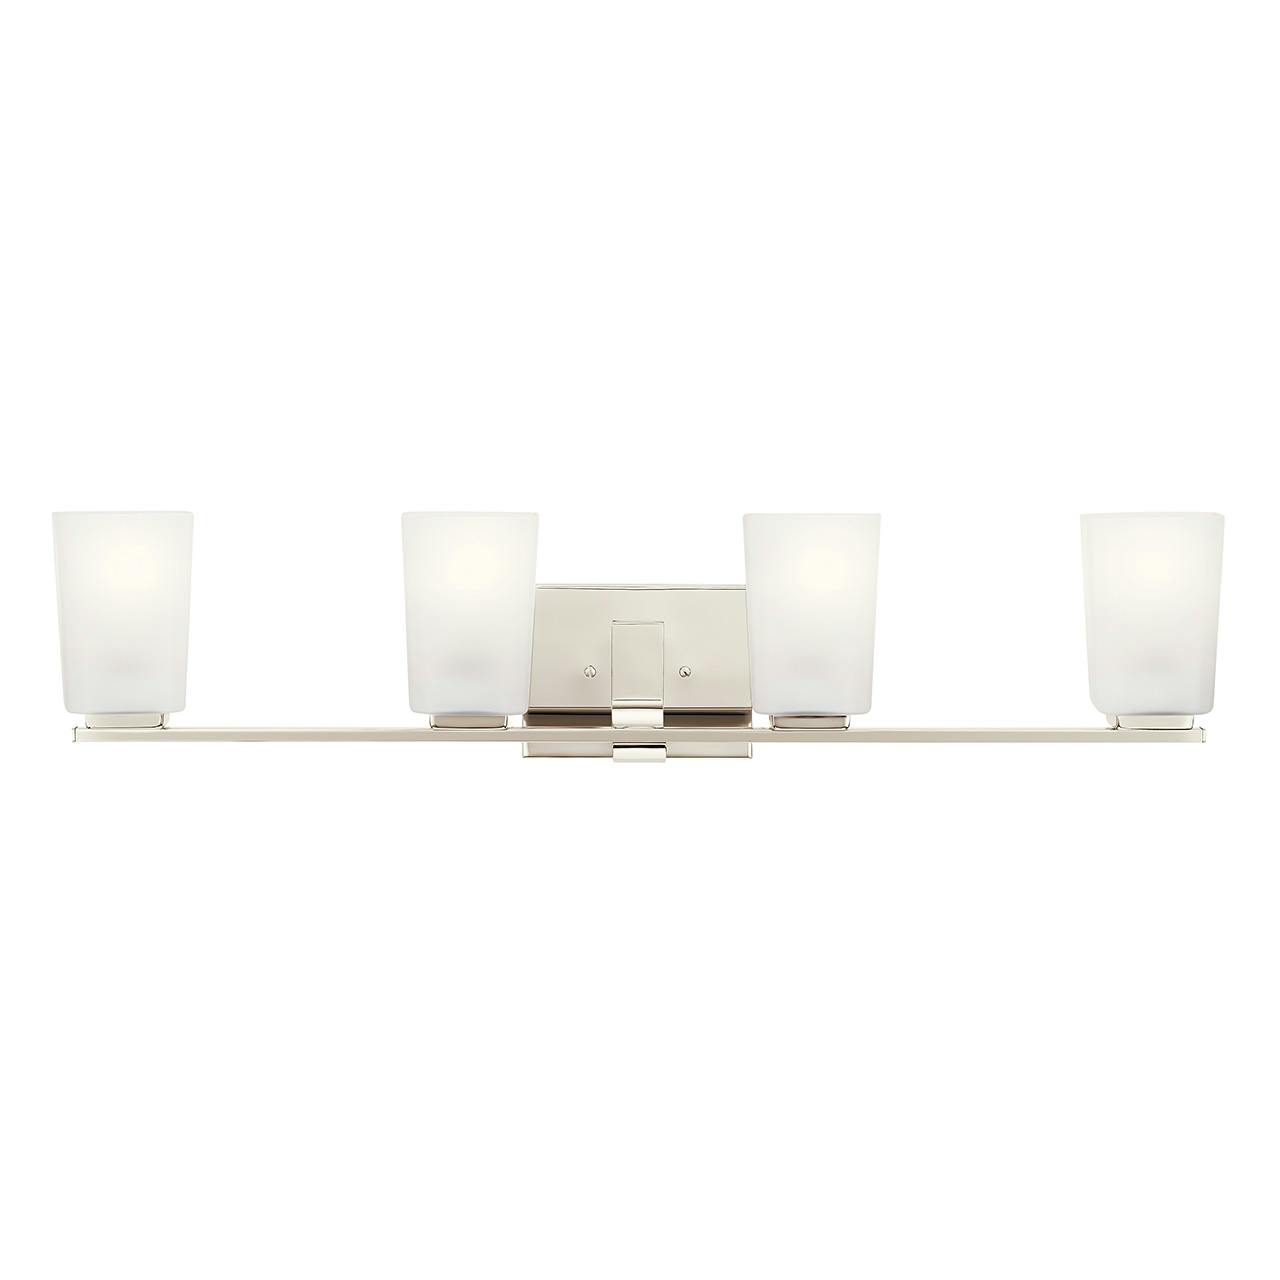 The Roehm 4 Light Vanity Light Nickel facing up on a white background